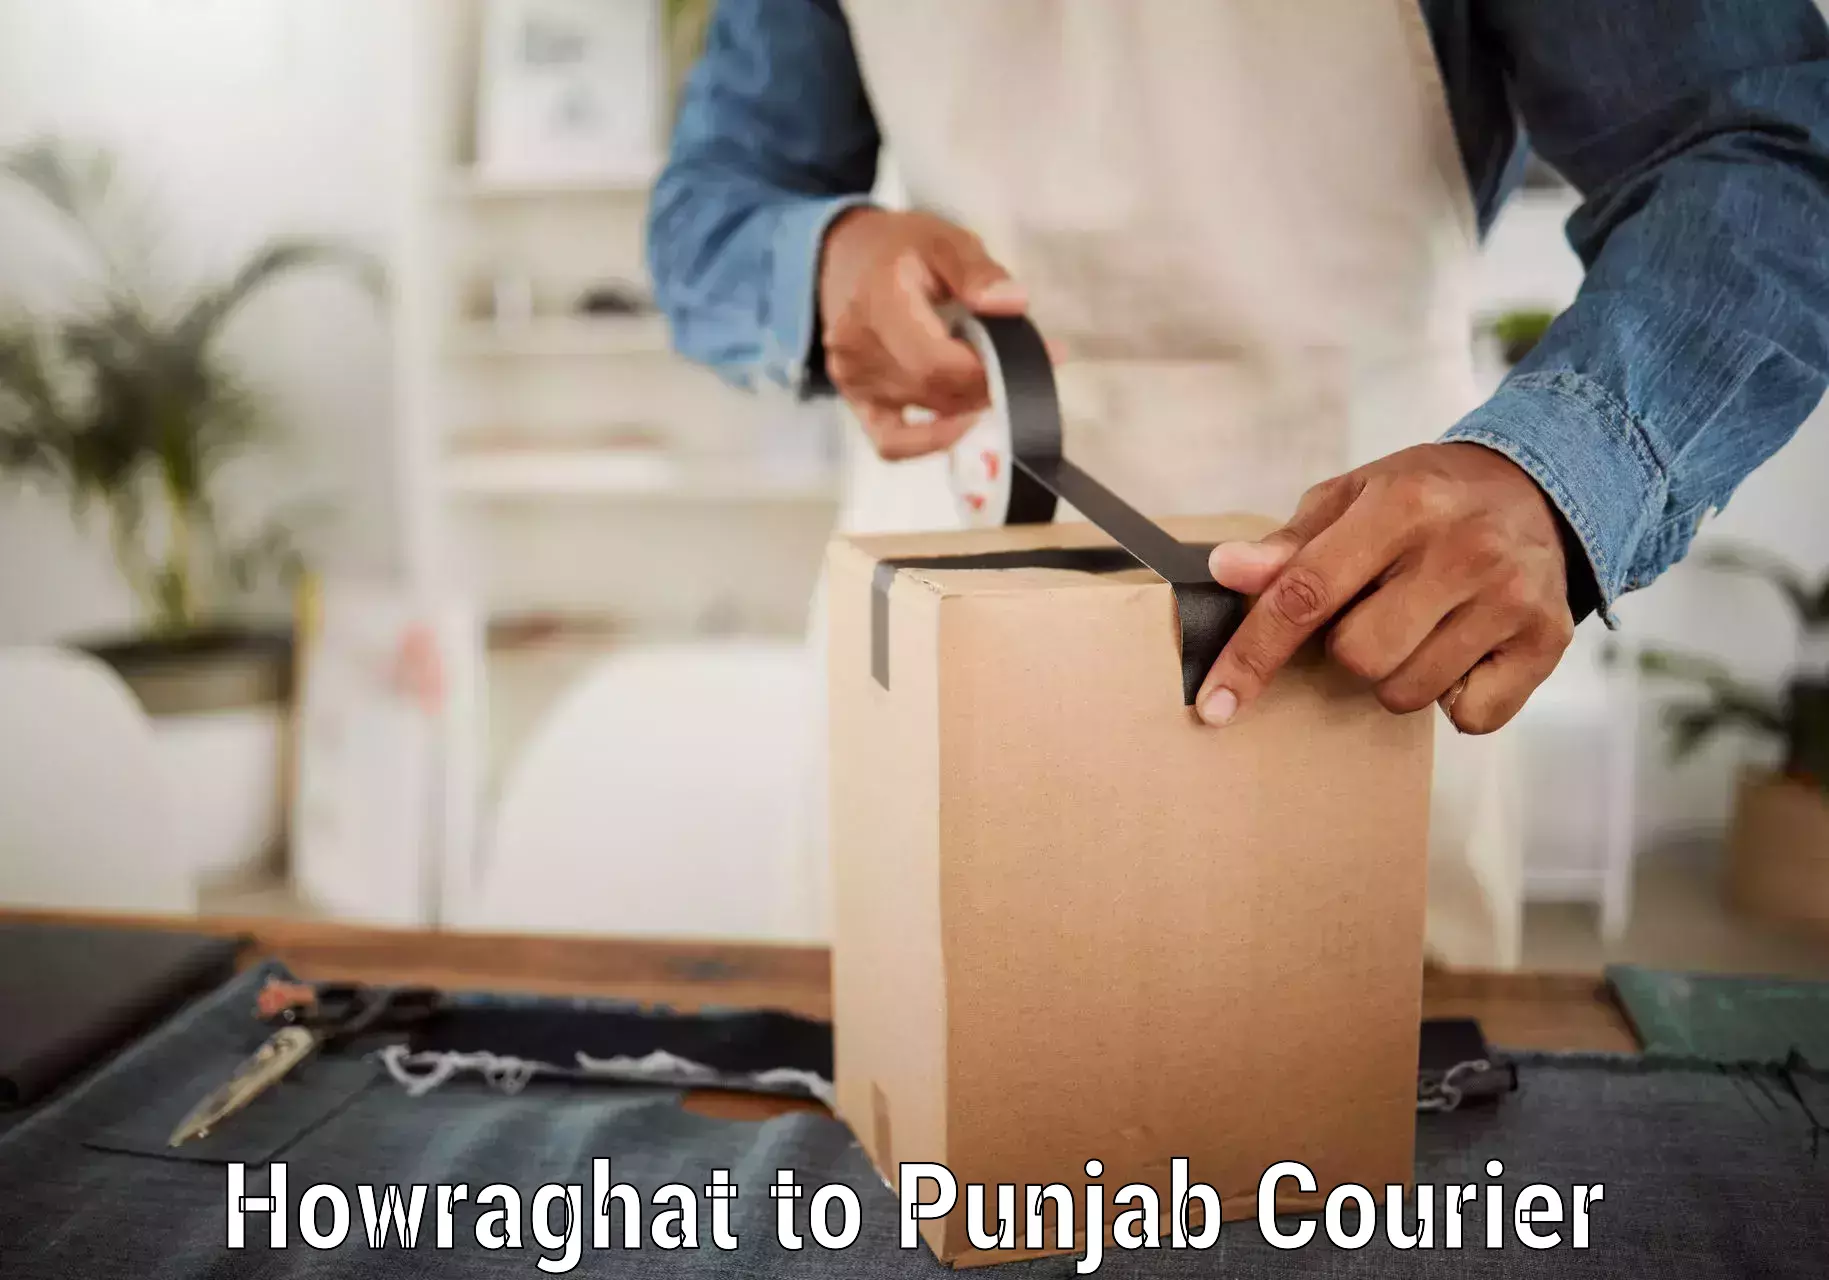 Parcel delivery automation Howraghat to Jhunir